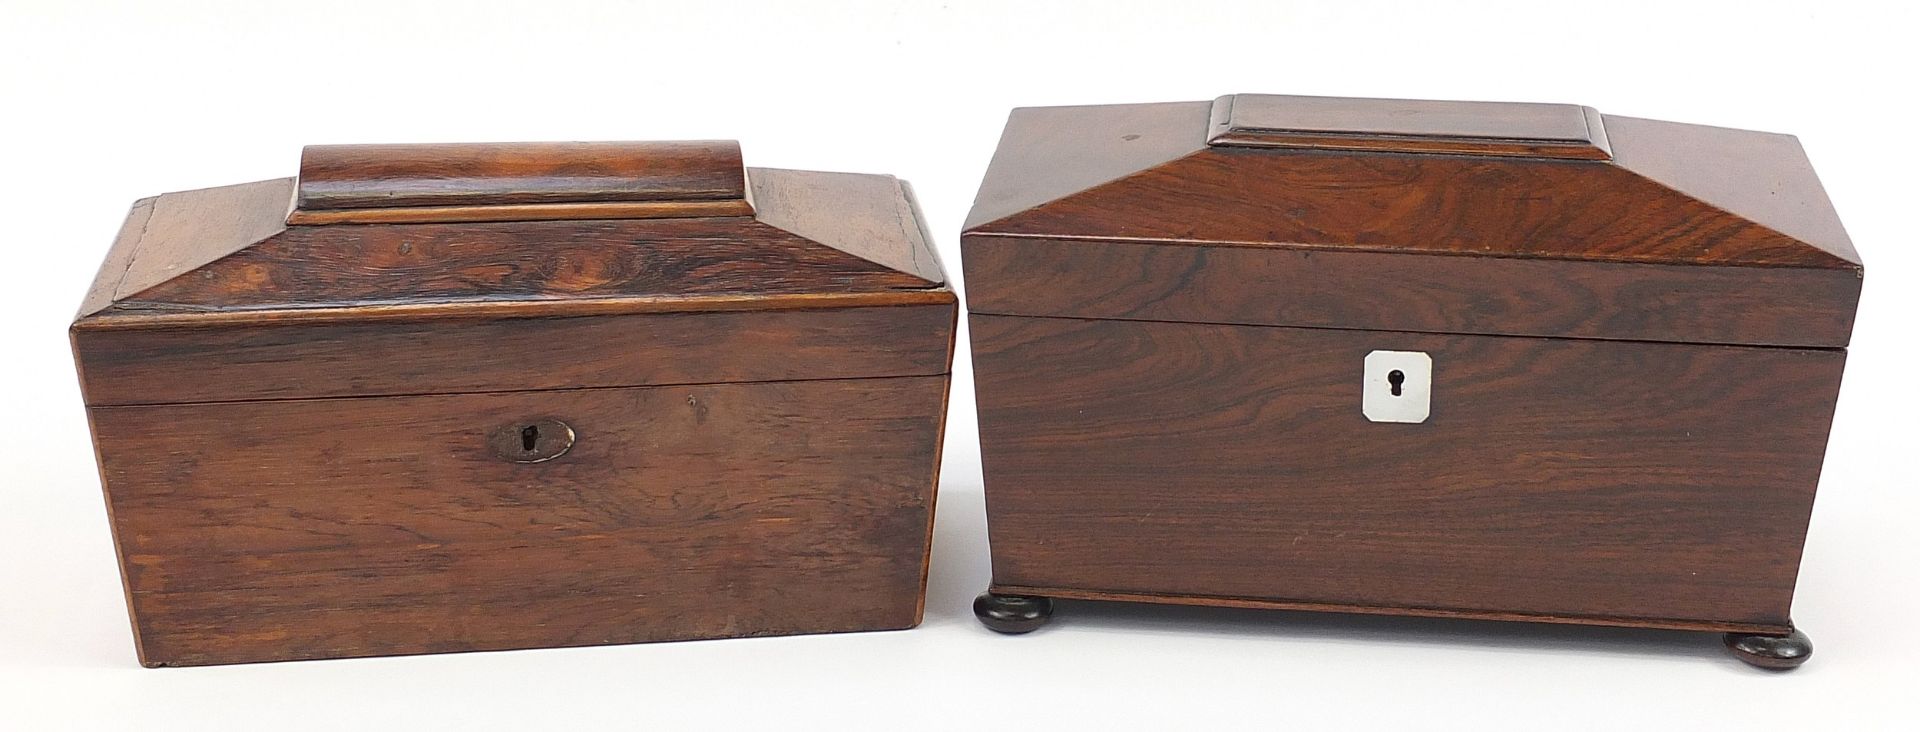 Two 19th century rosewood sarcophagus shaped tea caddies with twin divisional interiors, the largest